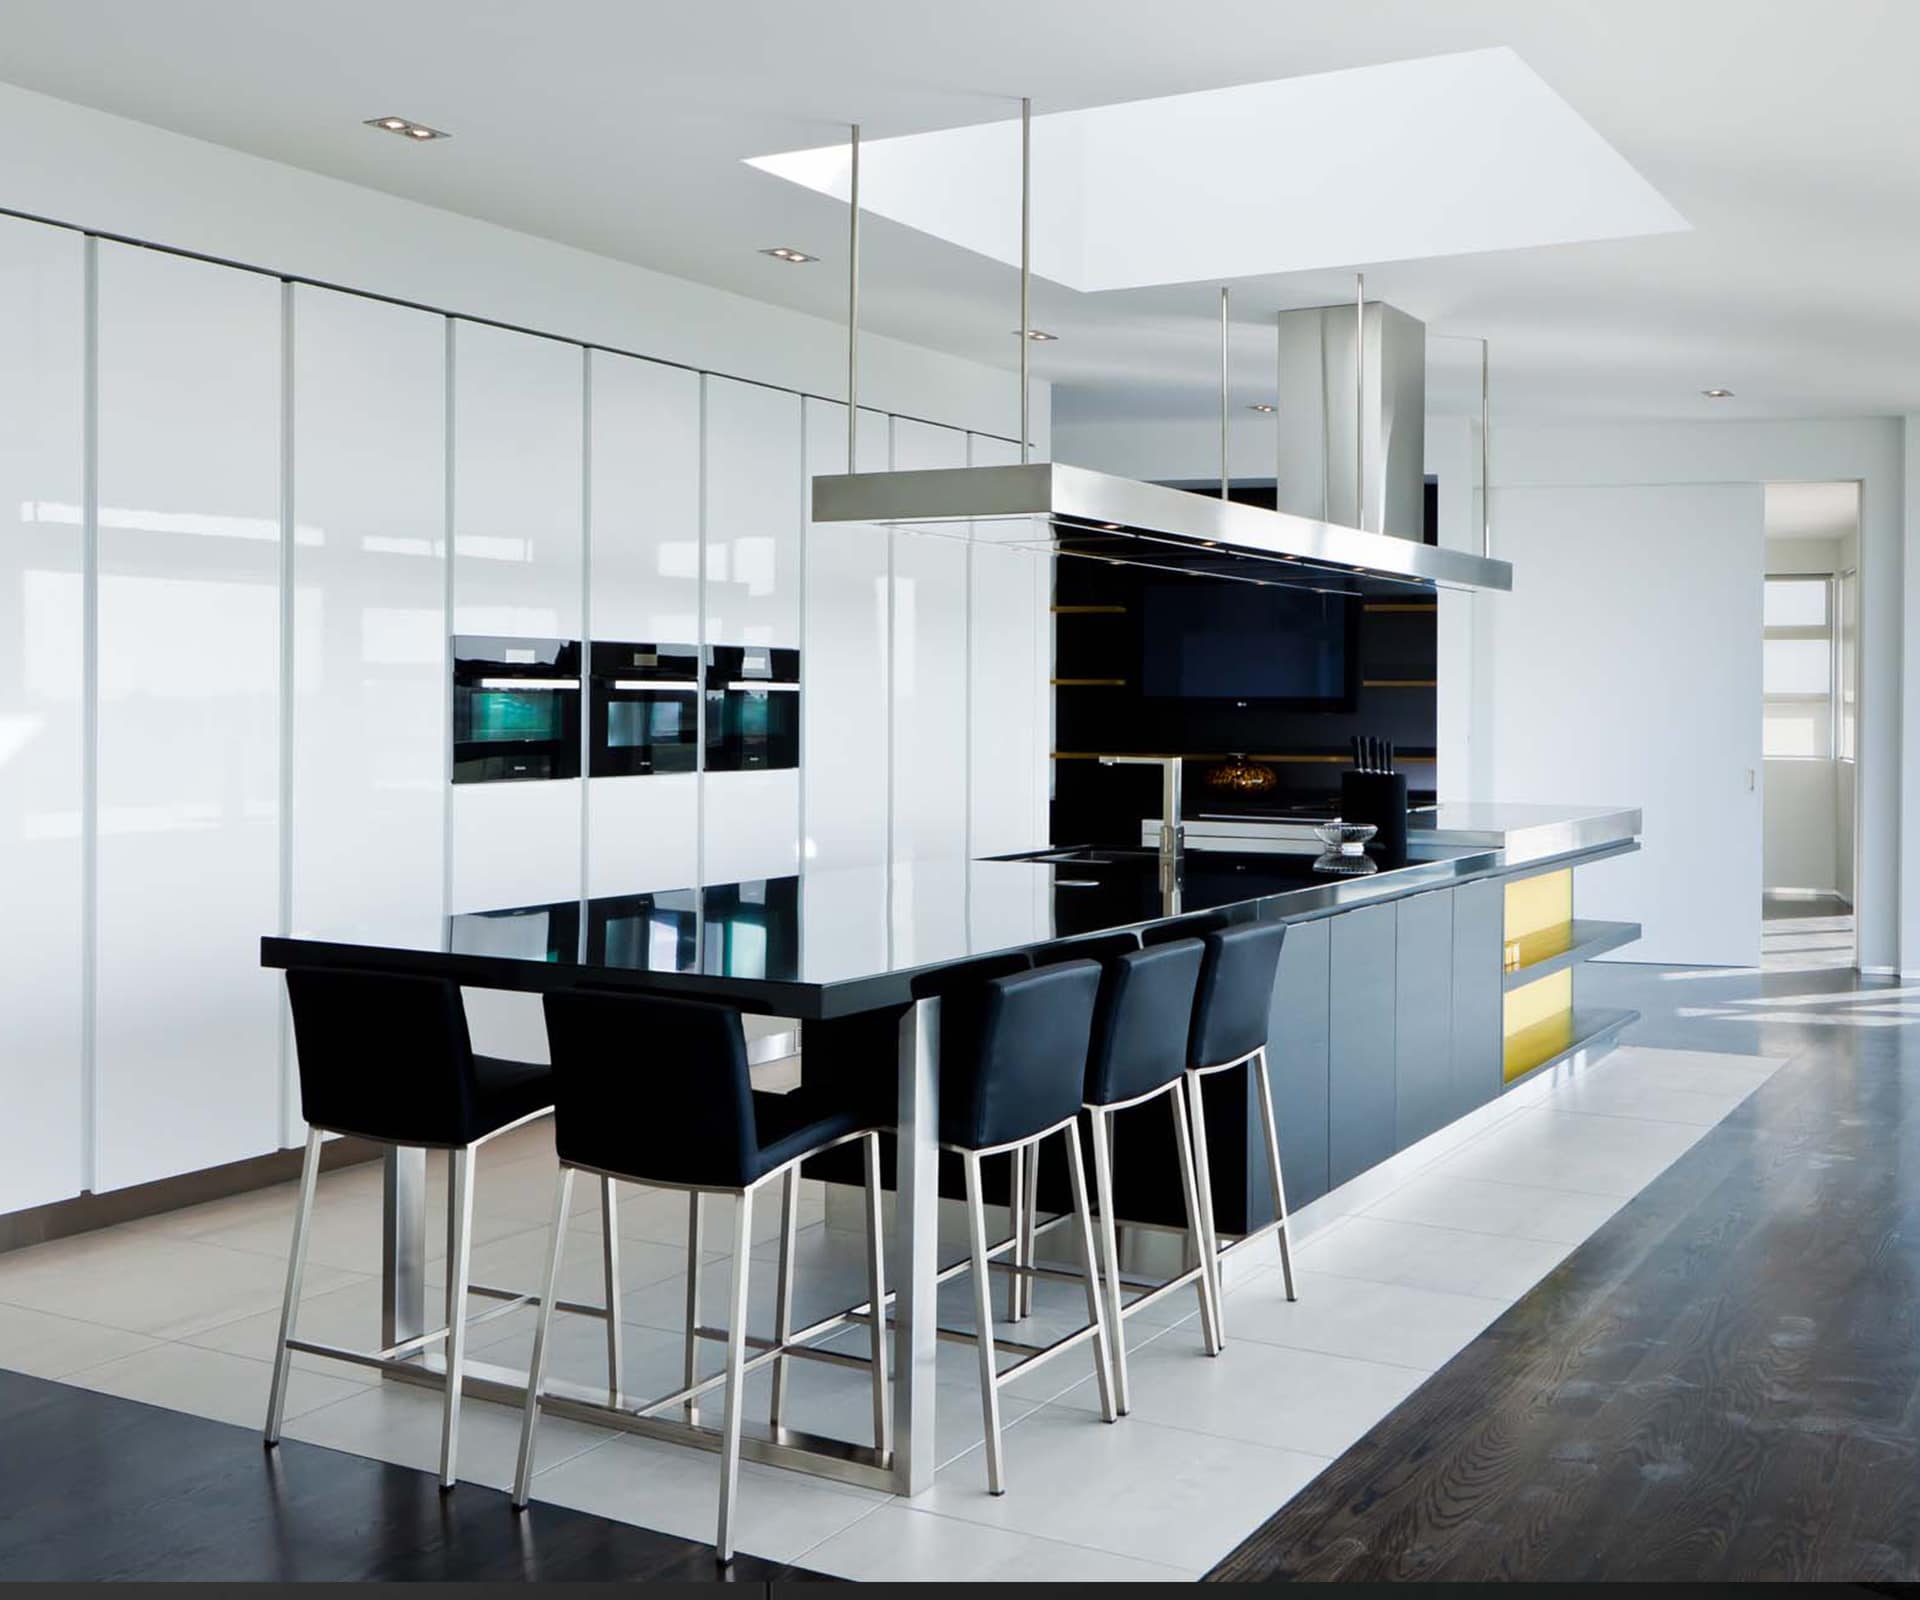 A kitchen in sleek contemporary style by the team at Kitchens By Design. 